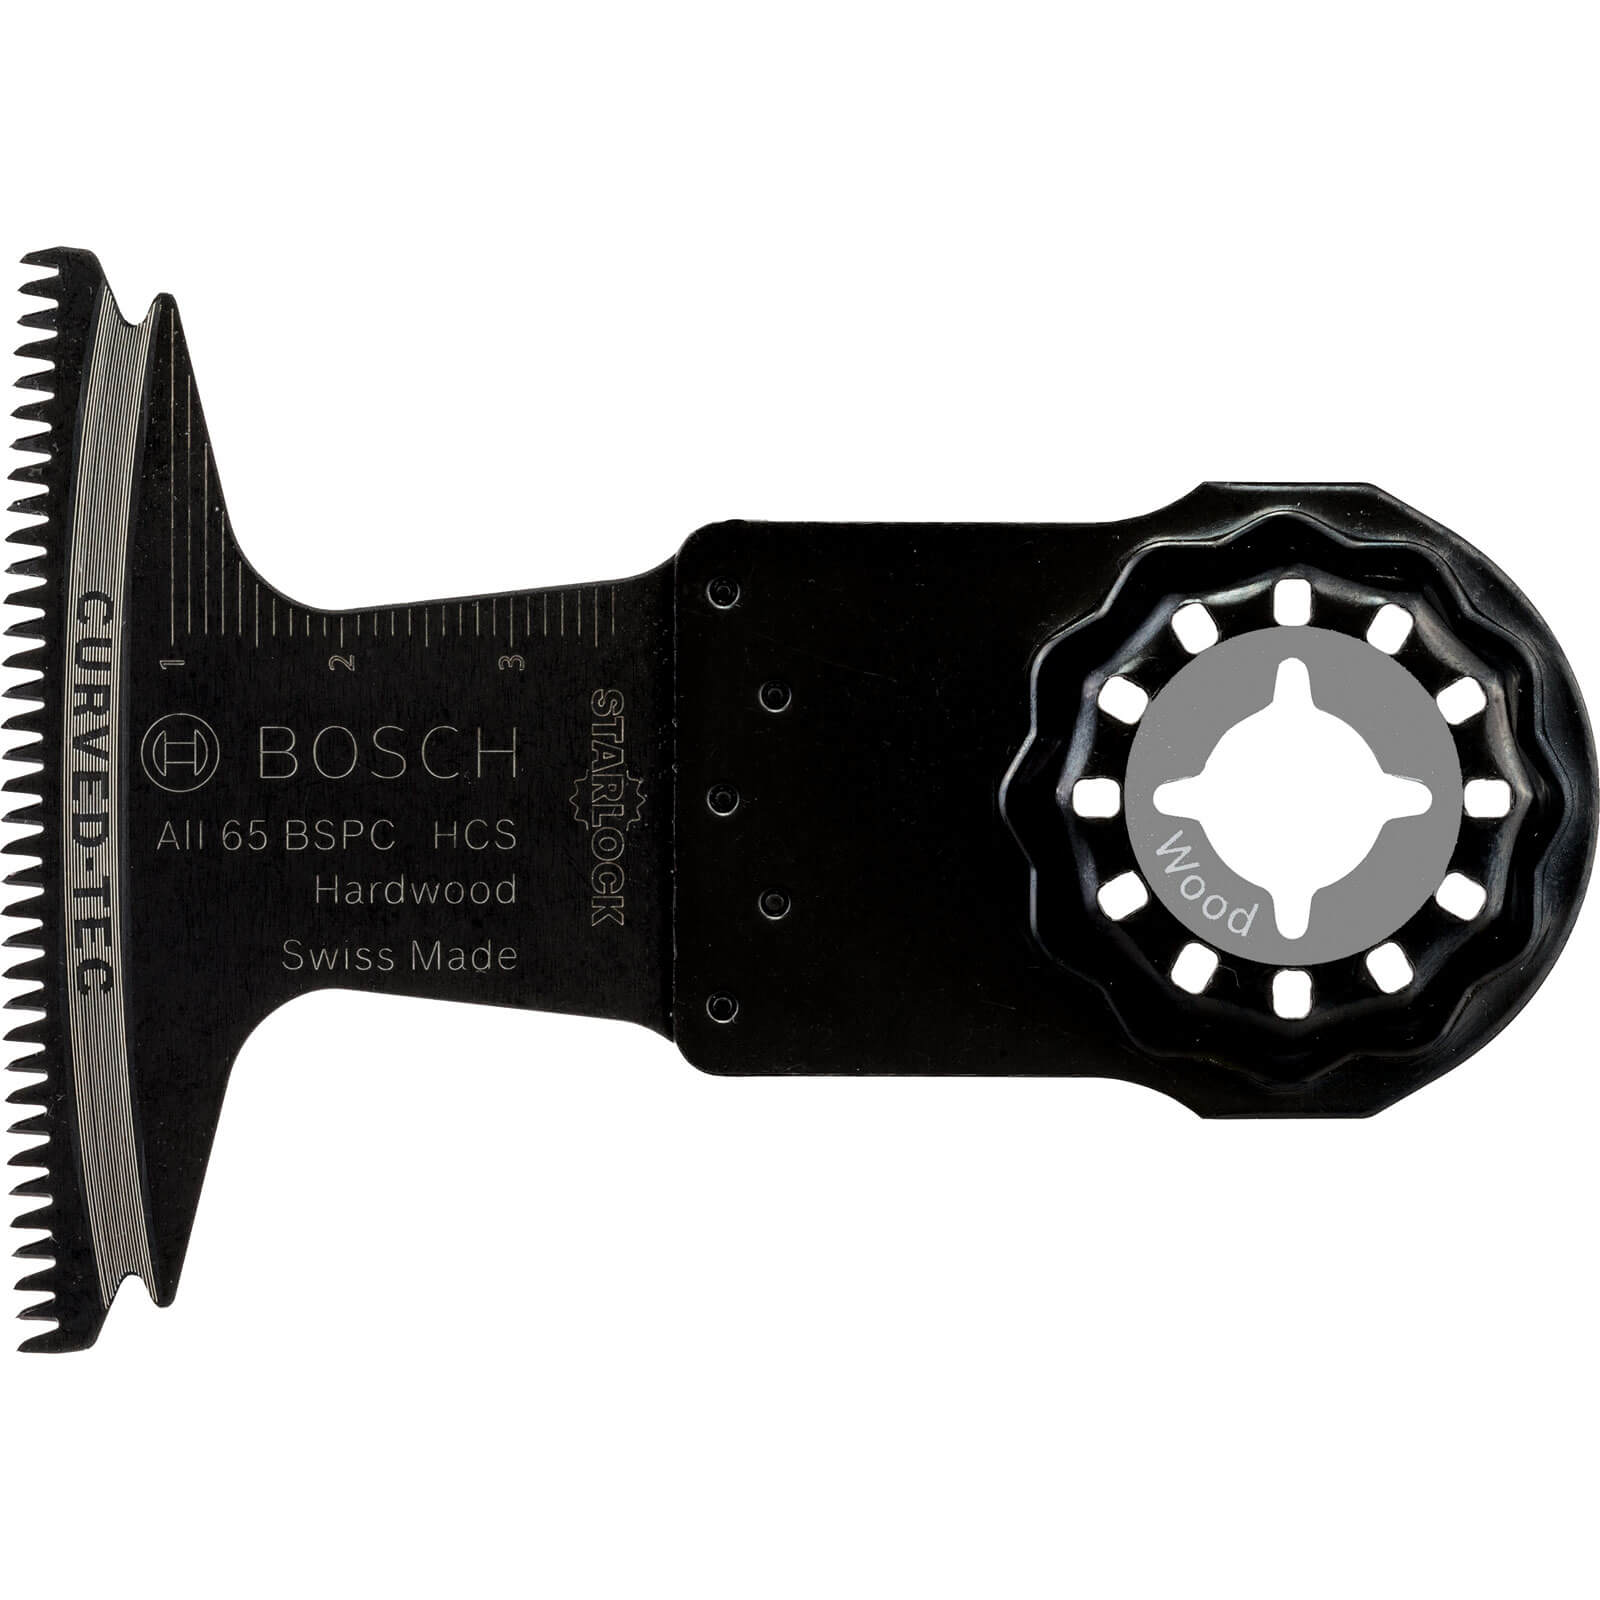 Image of Bosch AII 65 BSPC HCS Hard Wood Starlock Oscillating Multi Tool Plunge Saw Blade 65mm Pack of 5